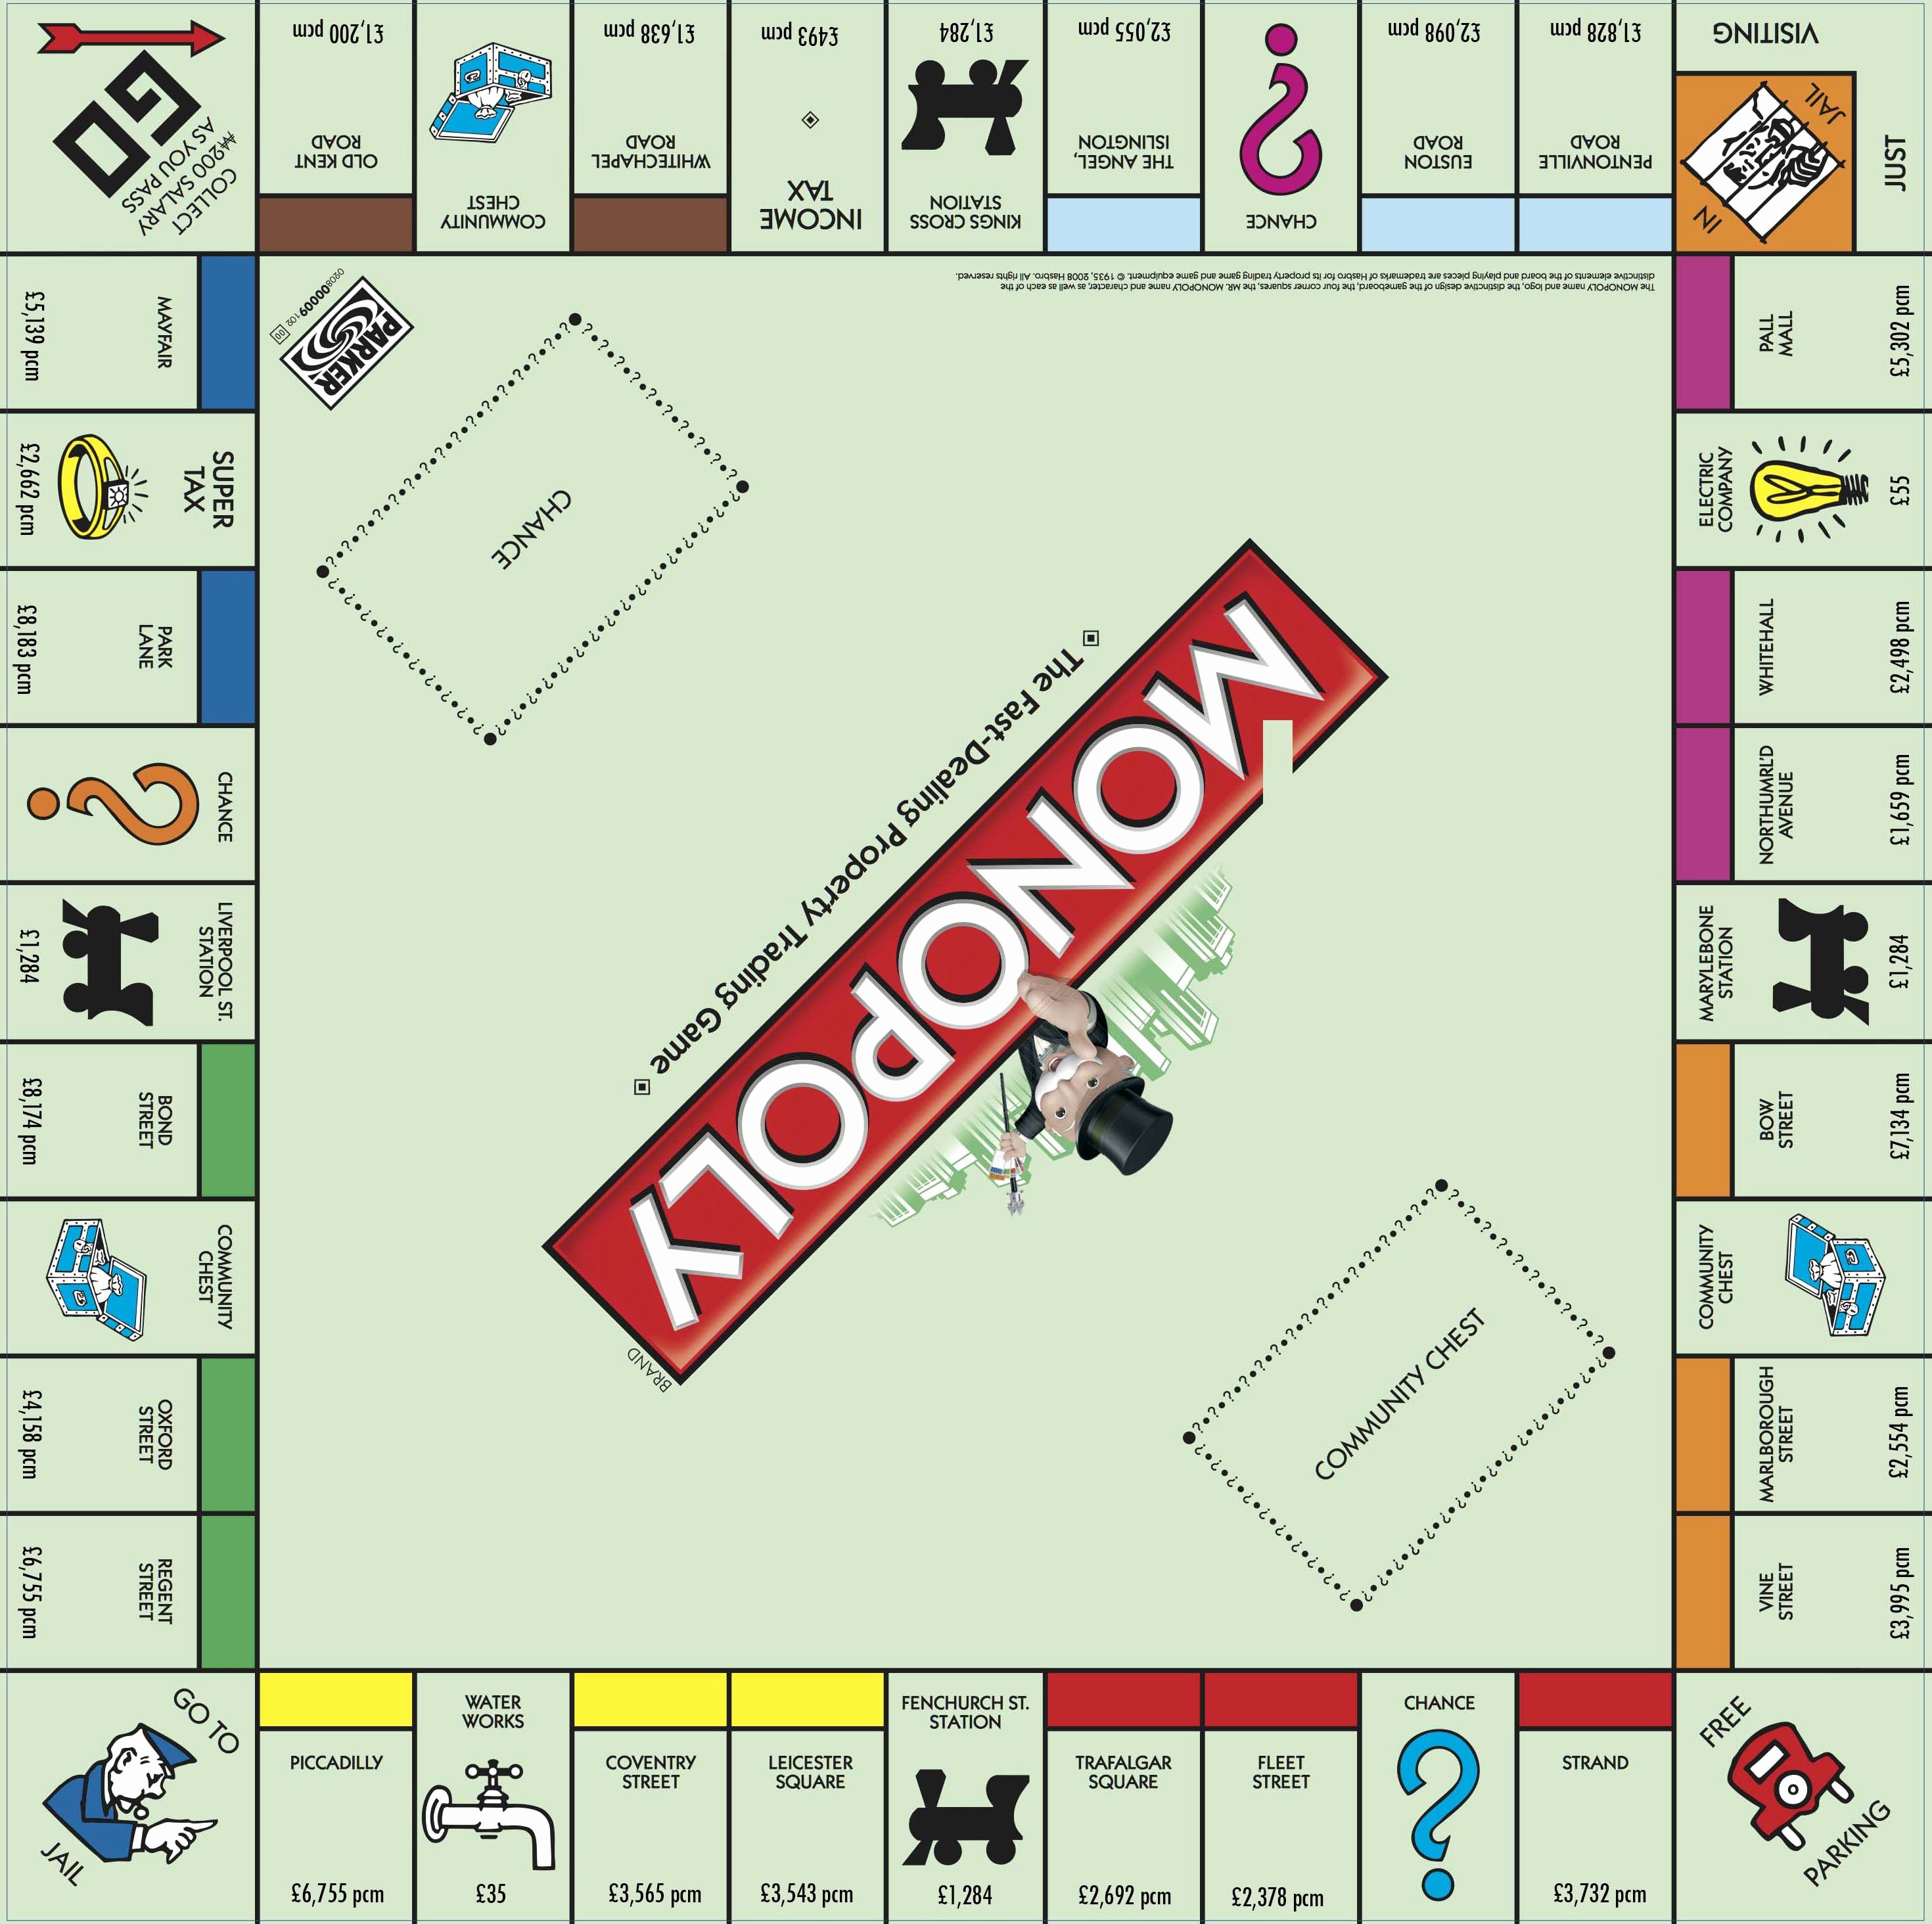 Monopoly Board Layout Inspirational Here’s What the Monopoly Board Would Look Like for London